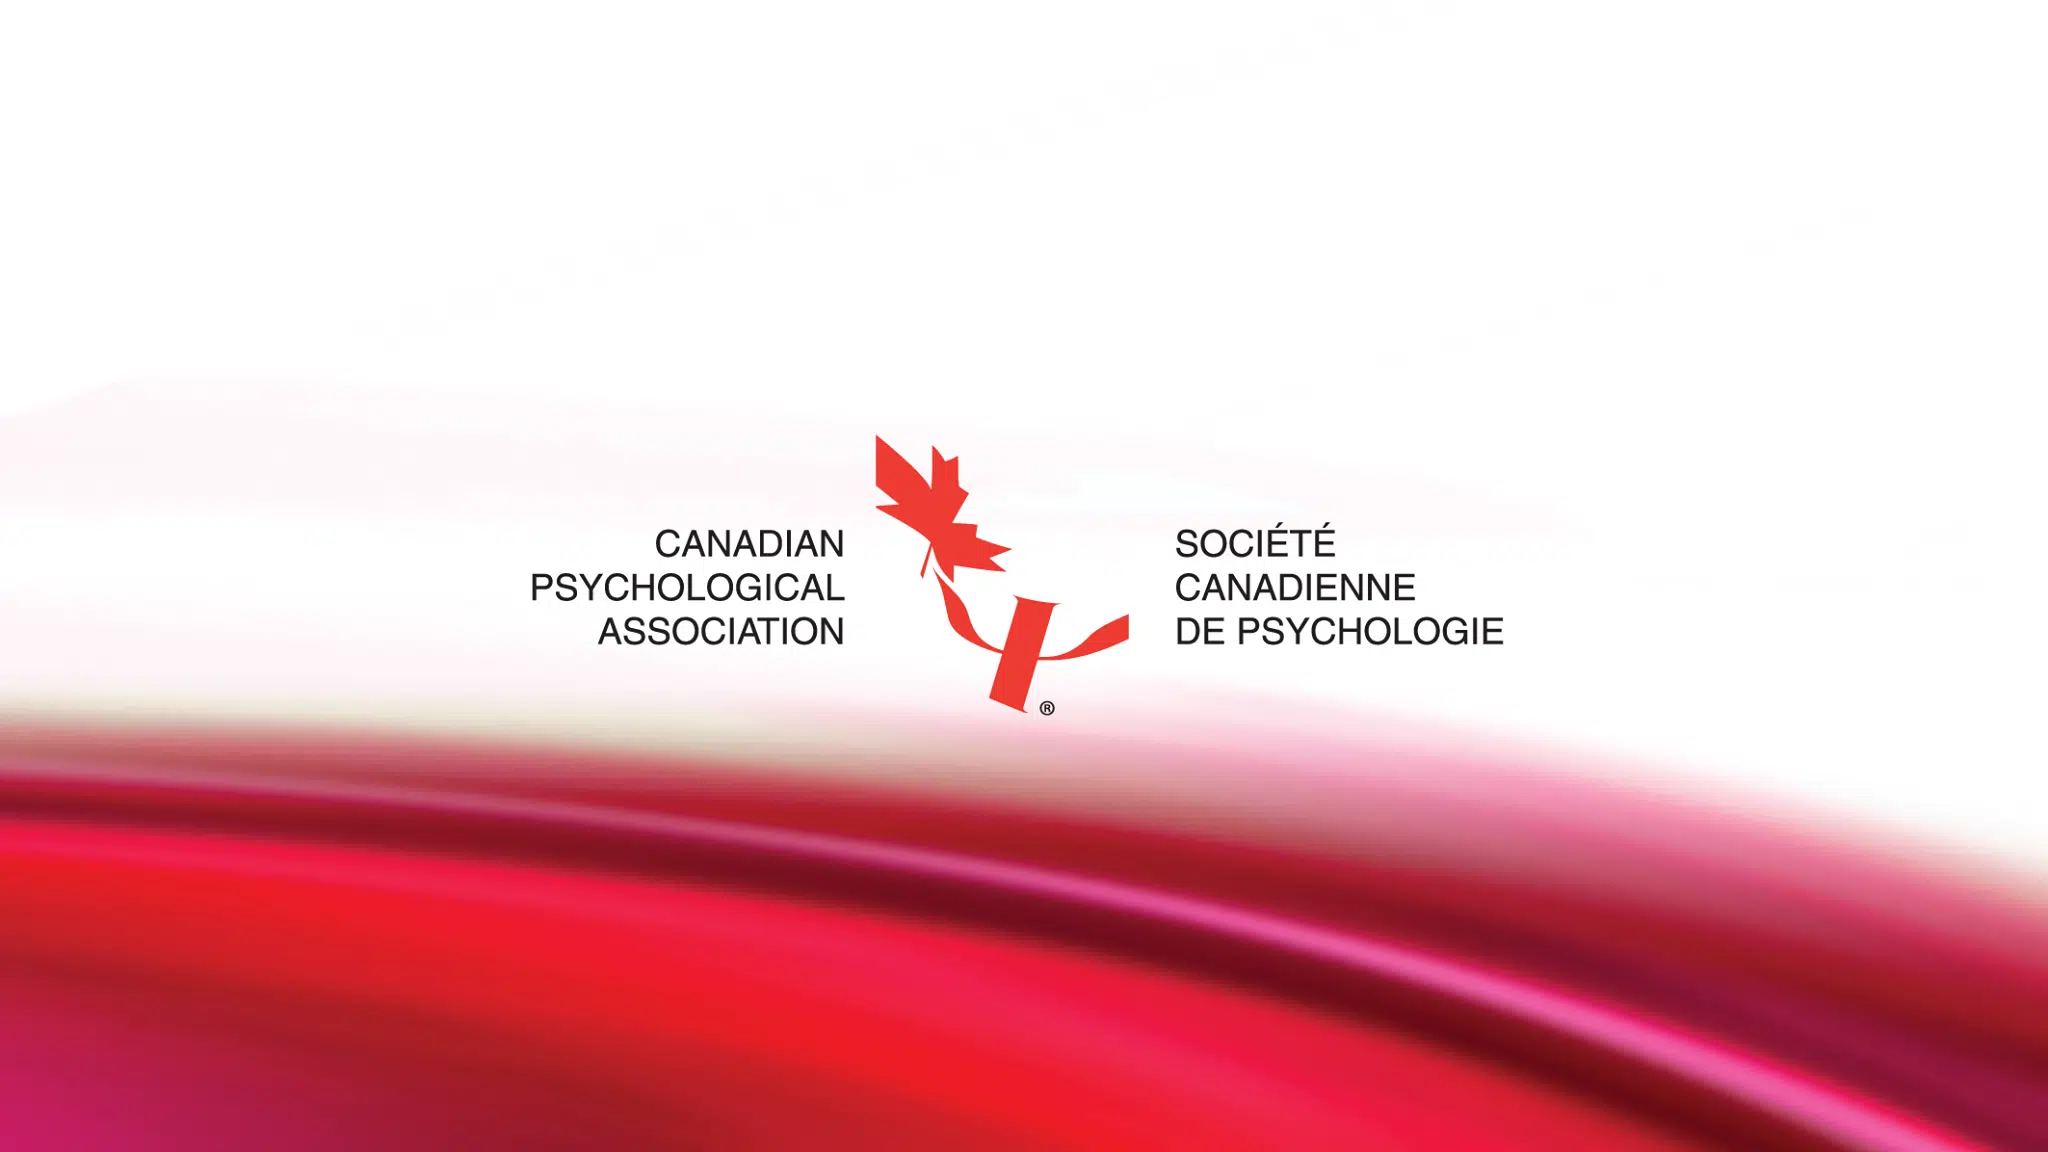 Free psychological services for frontline health care workers